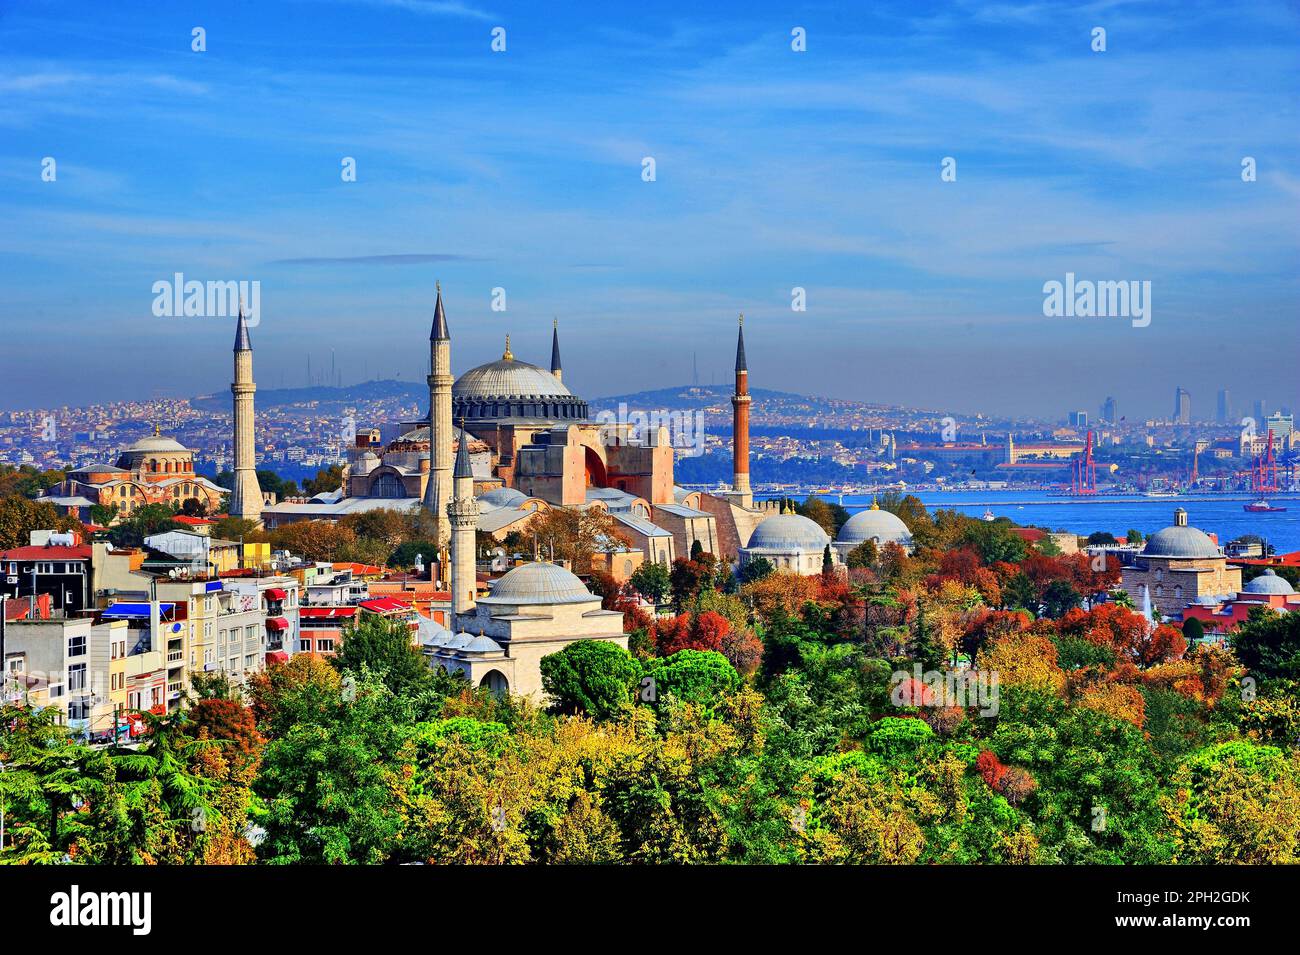 istanbul, view of the haiga sophia with colorful autumn trees in front and a view of the Anatolian side of Istanbul behind Stock Photo